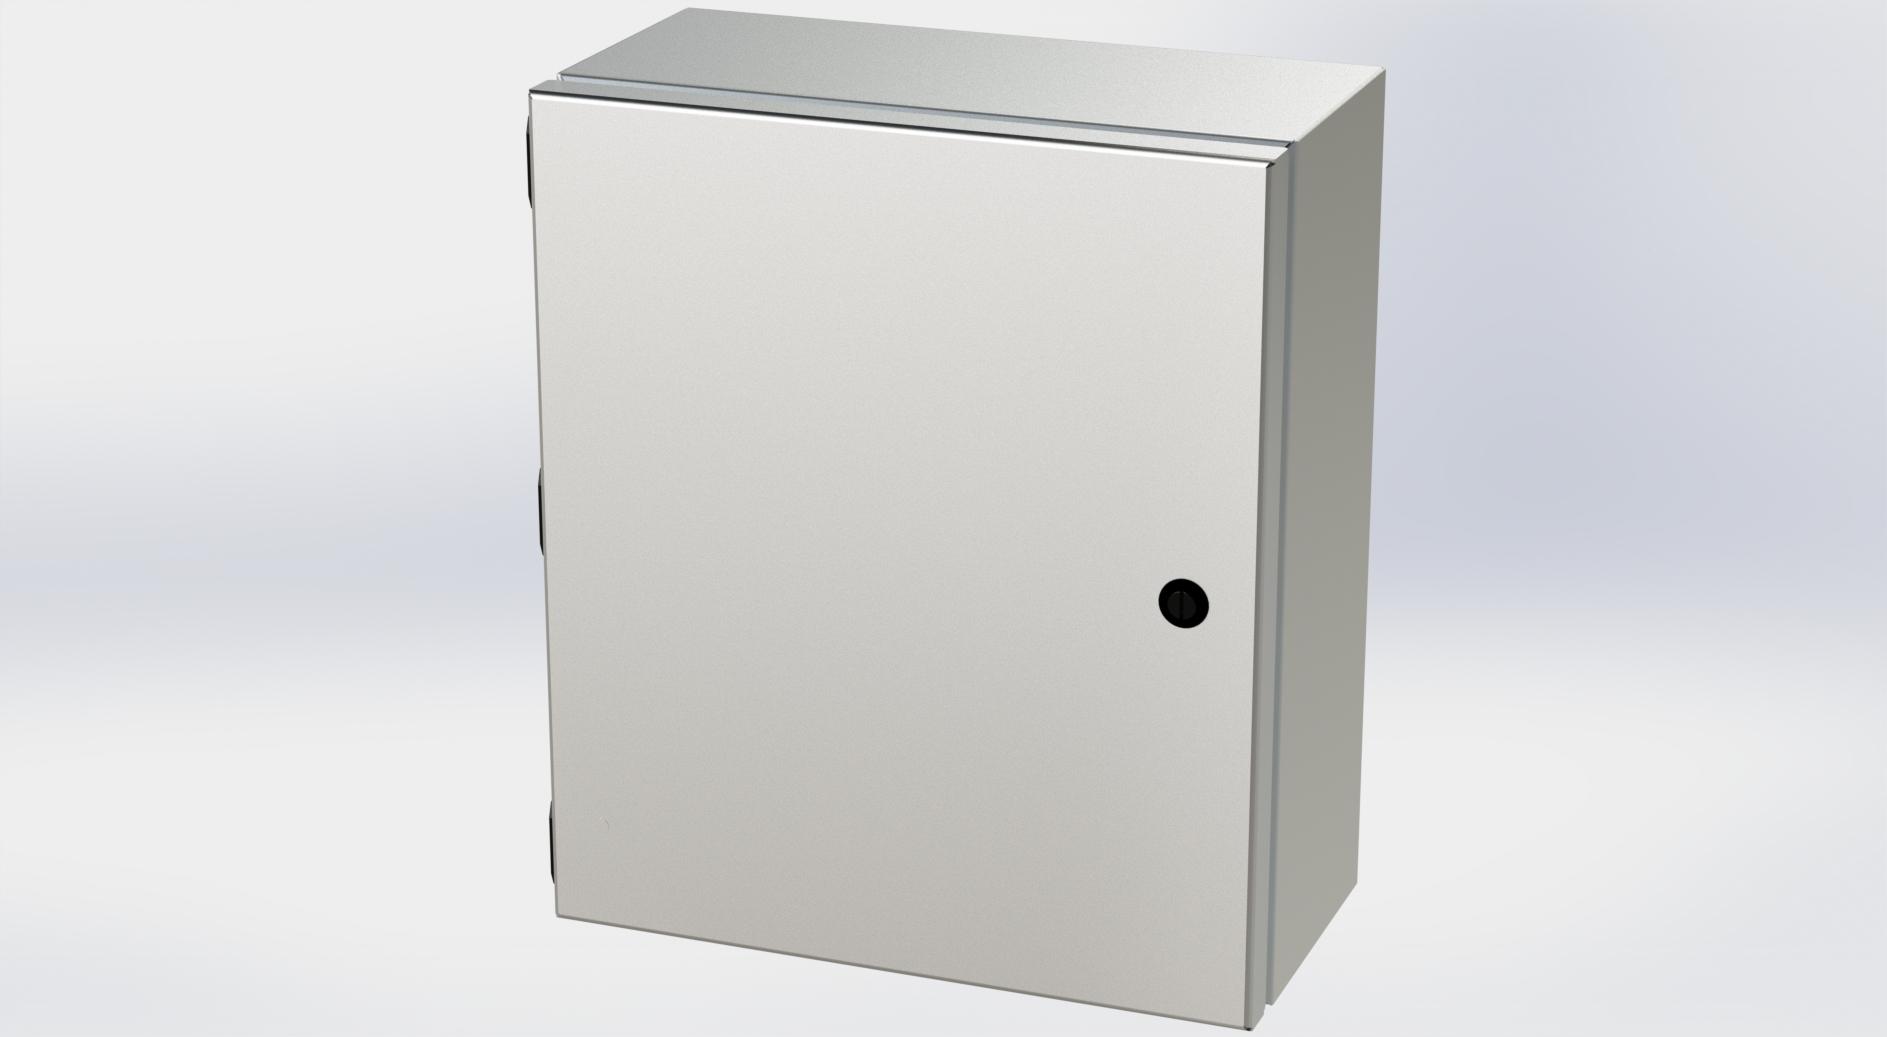 Saginaw Control SCE-1412ELJSS6 S.S. ELJ Enclosure, Height:14.00", Width:12.00", Depth:6.00", #4 brushed finish on all exterior surfaces. Optional sub-panels are powder coated white.